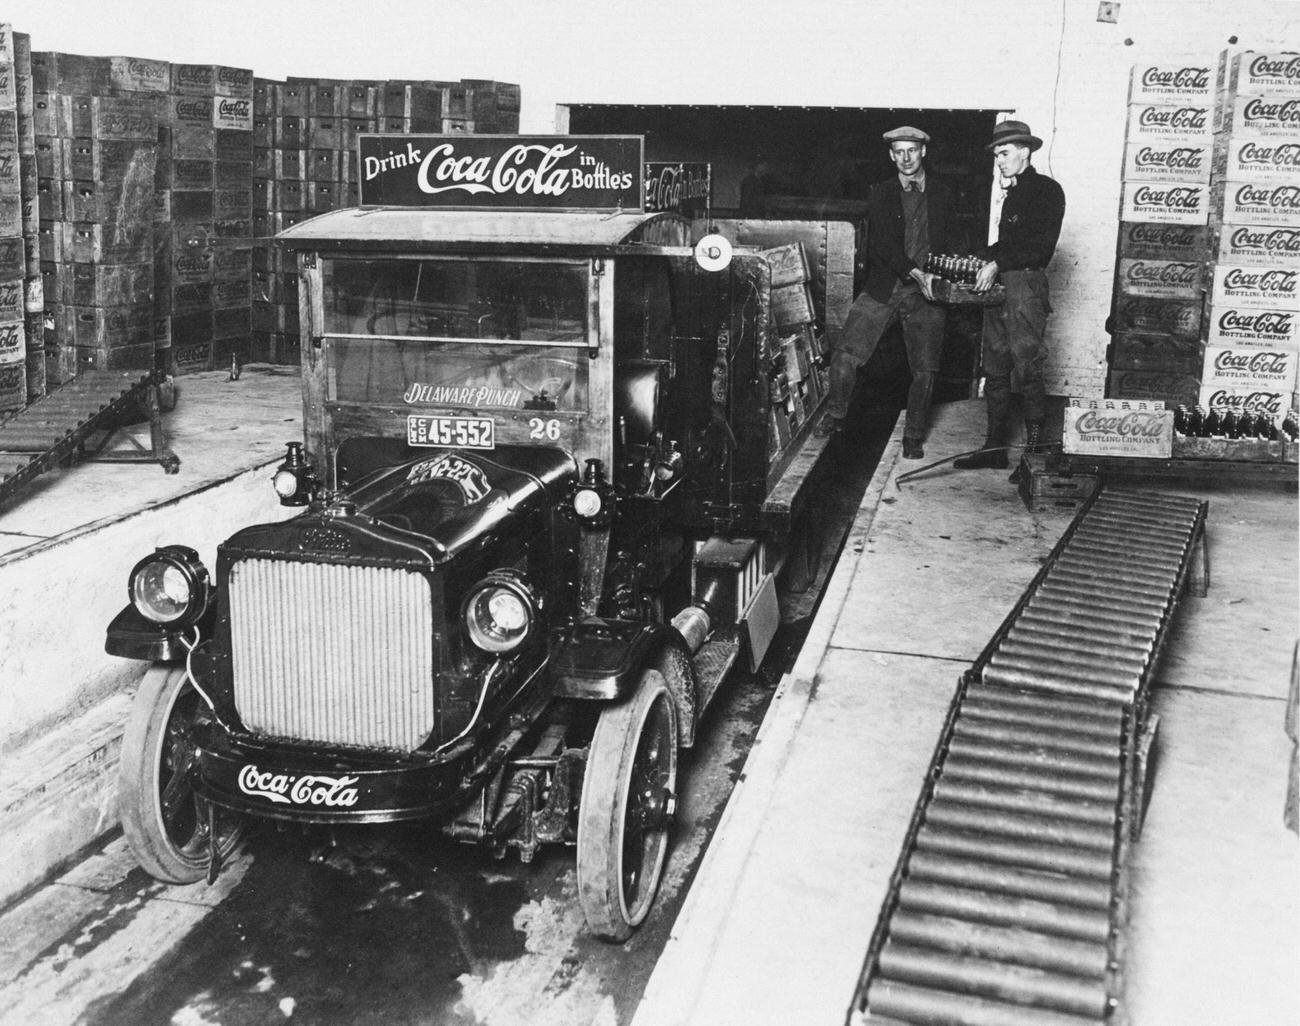 Workers loading crates of Coca-Cola onto a truck, circa 1930.